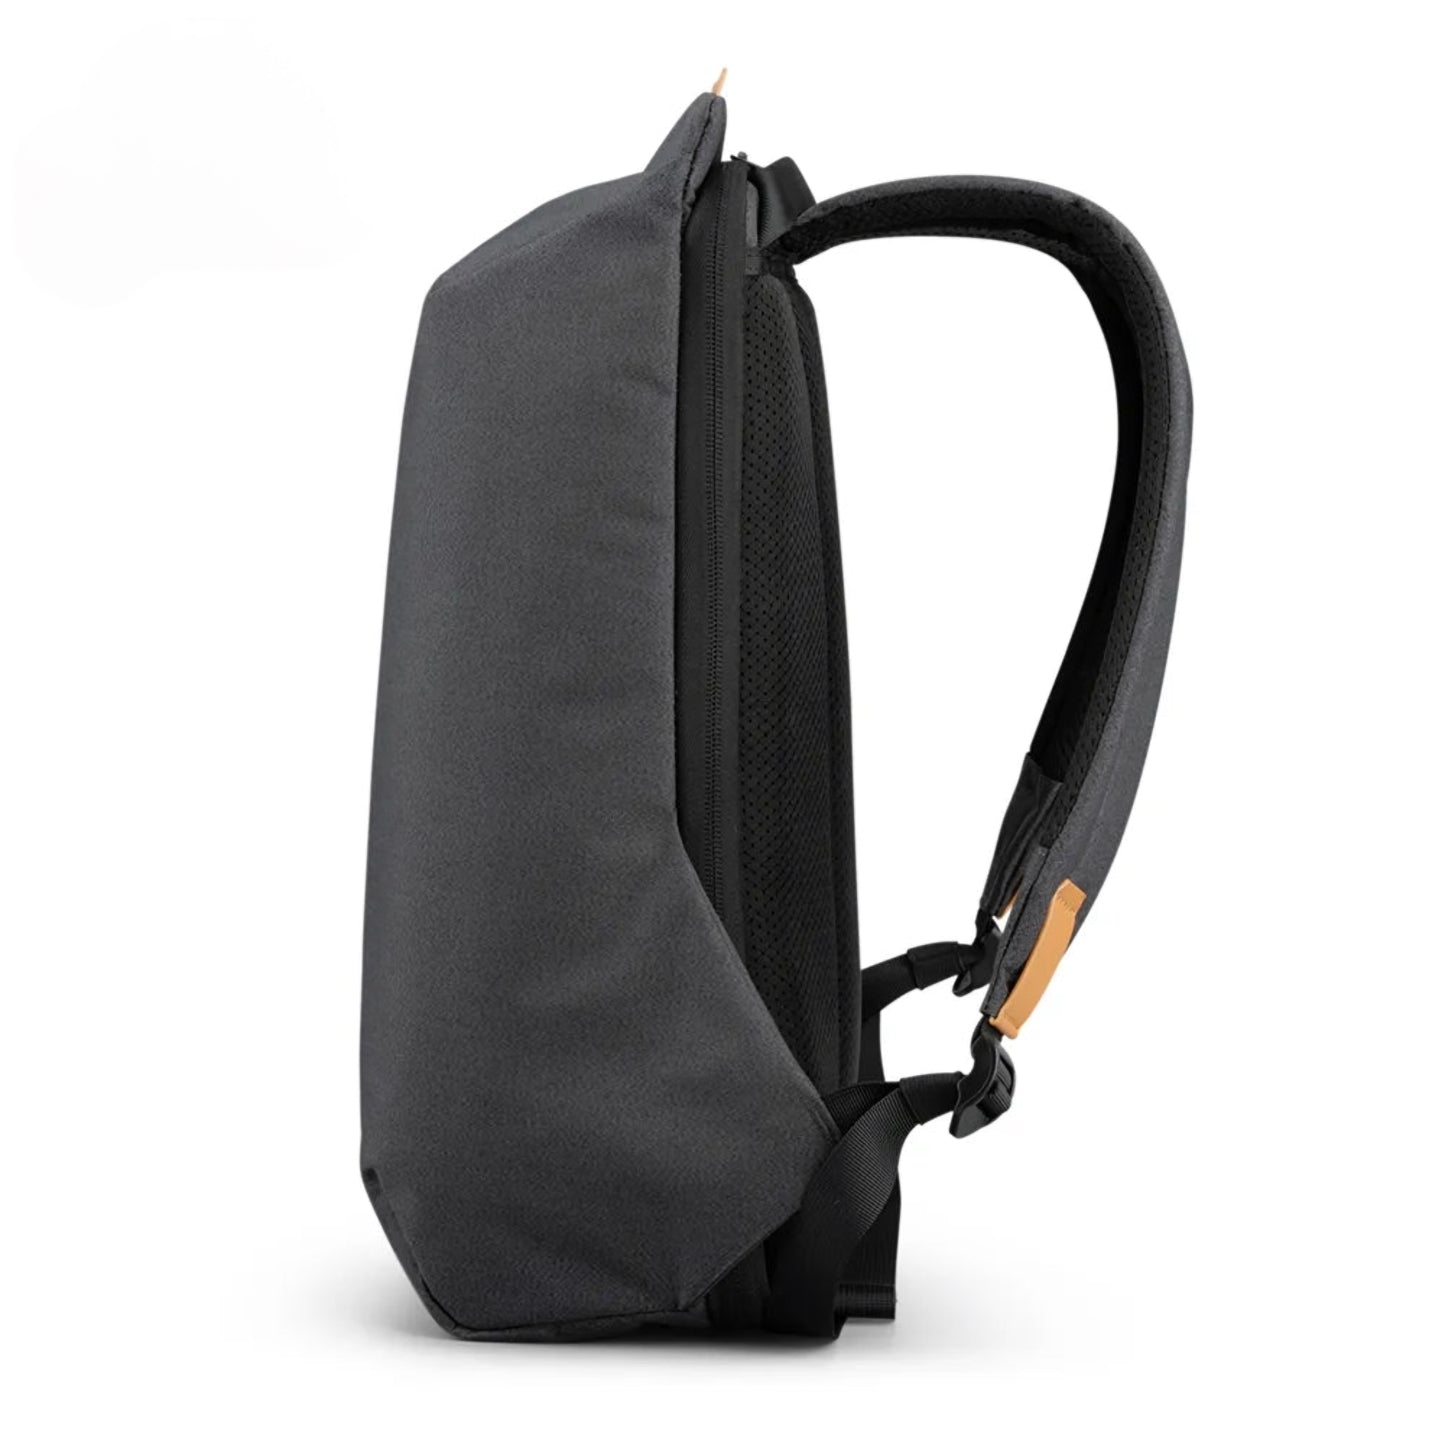 Anti-theft Backpack by KINGSONS